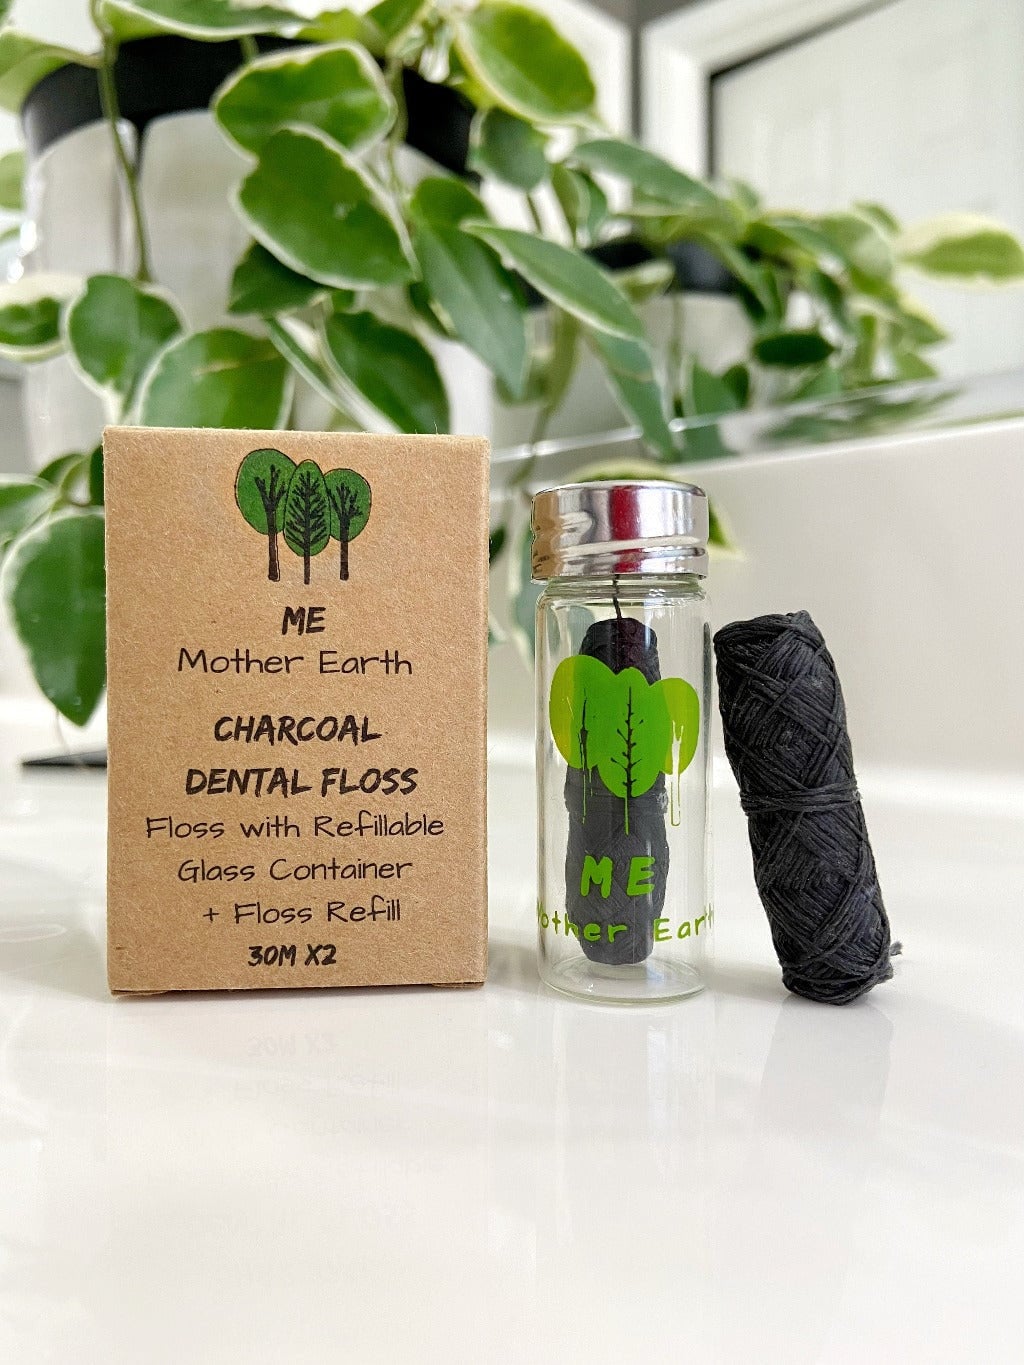 Ertutuyi Vegan Charcoal Floss Floss Based Wax Floss with Natural Mint Flavorin Charcoal Biodegradable Floss Container, Size: One Size